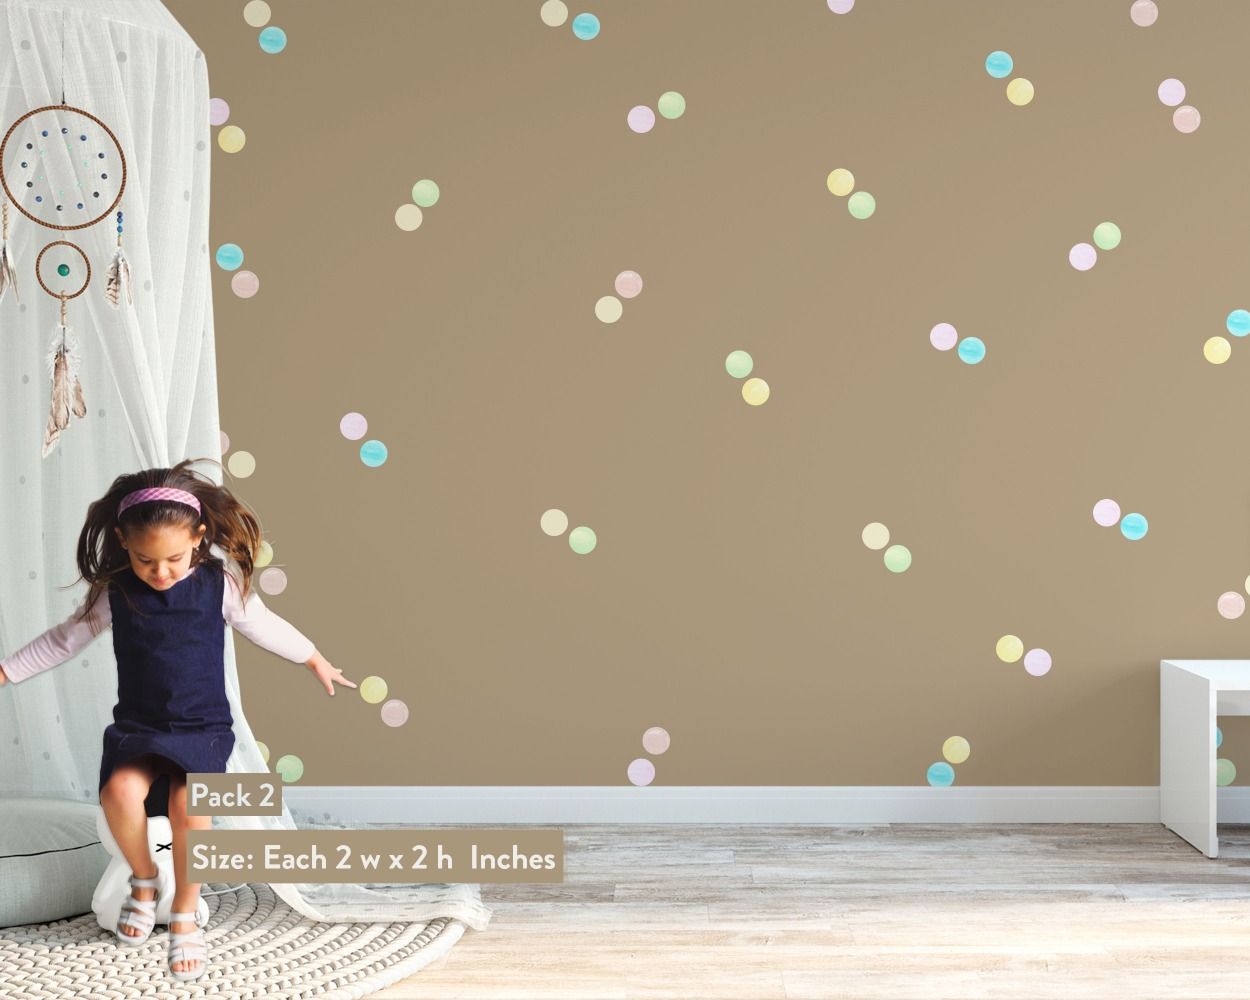 Beautiful Multicolour Dots Vinyl Wall Stickers for Kids Room Wall Decor